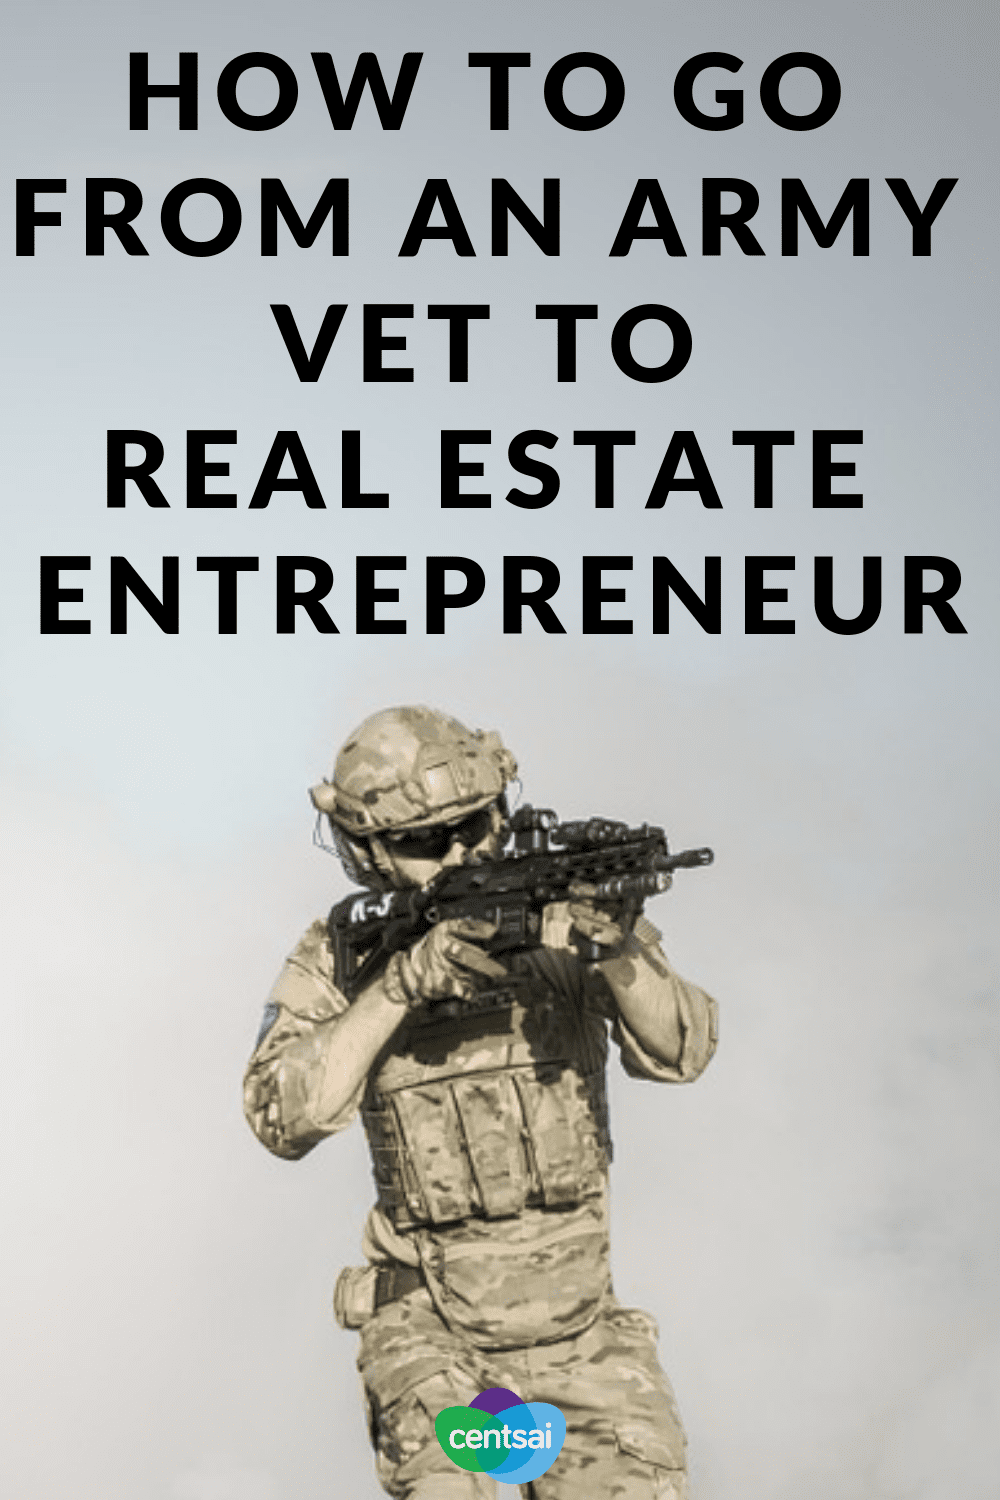 How To Go From An Army Vet to Real Estate Entrepreneur. Learn how one Army veteran grew his business from the ground up and used his success as a real estate entrepreneur to help other vets. #veteran #realestate #entrepreneur